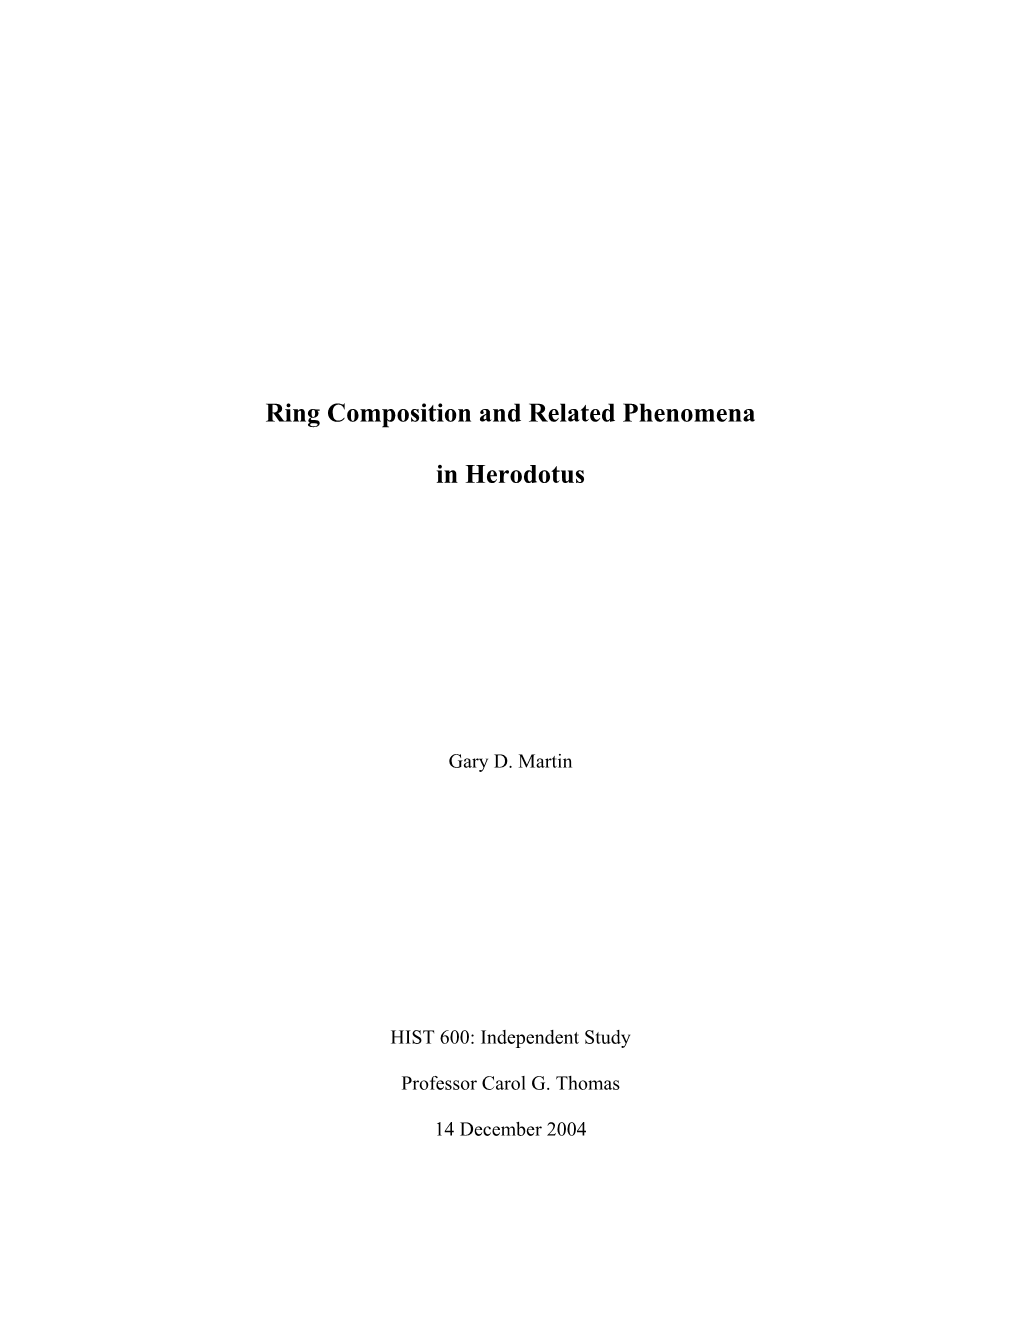 Ring Composition and Related Phenomena in Herodotus 2